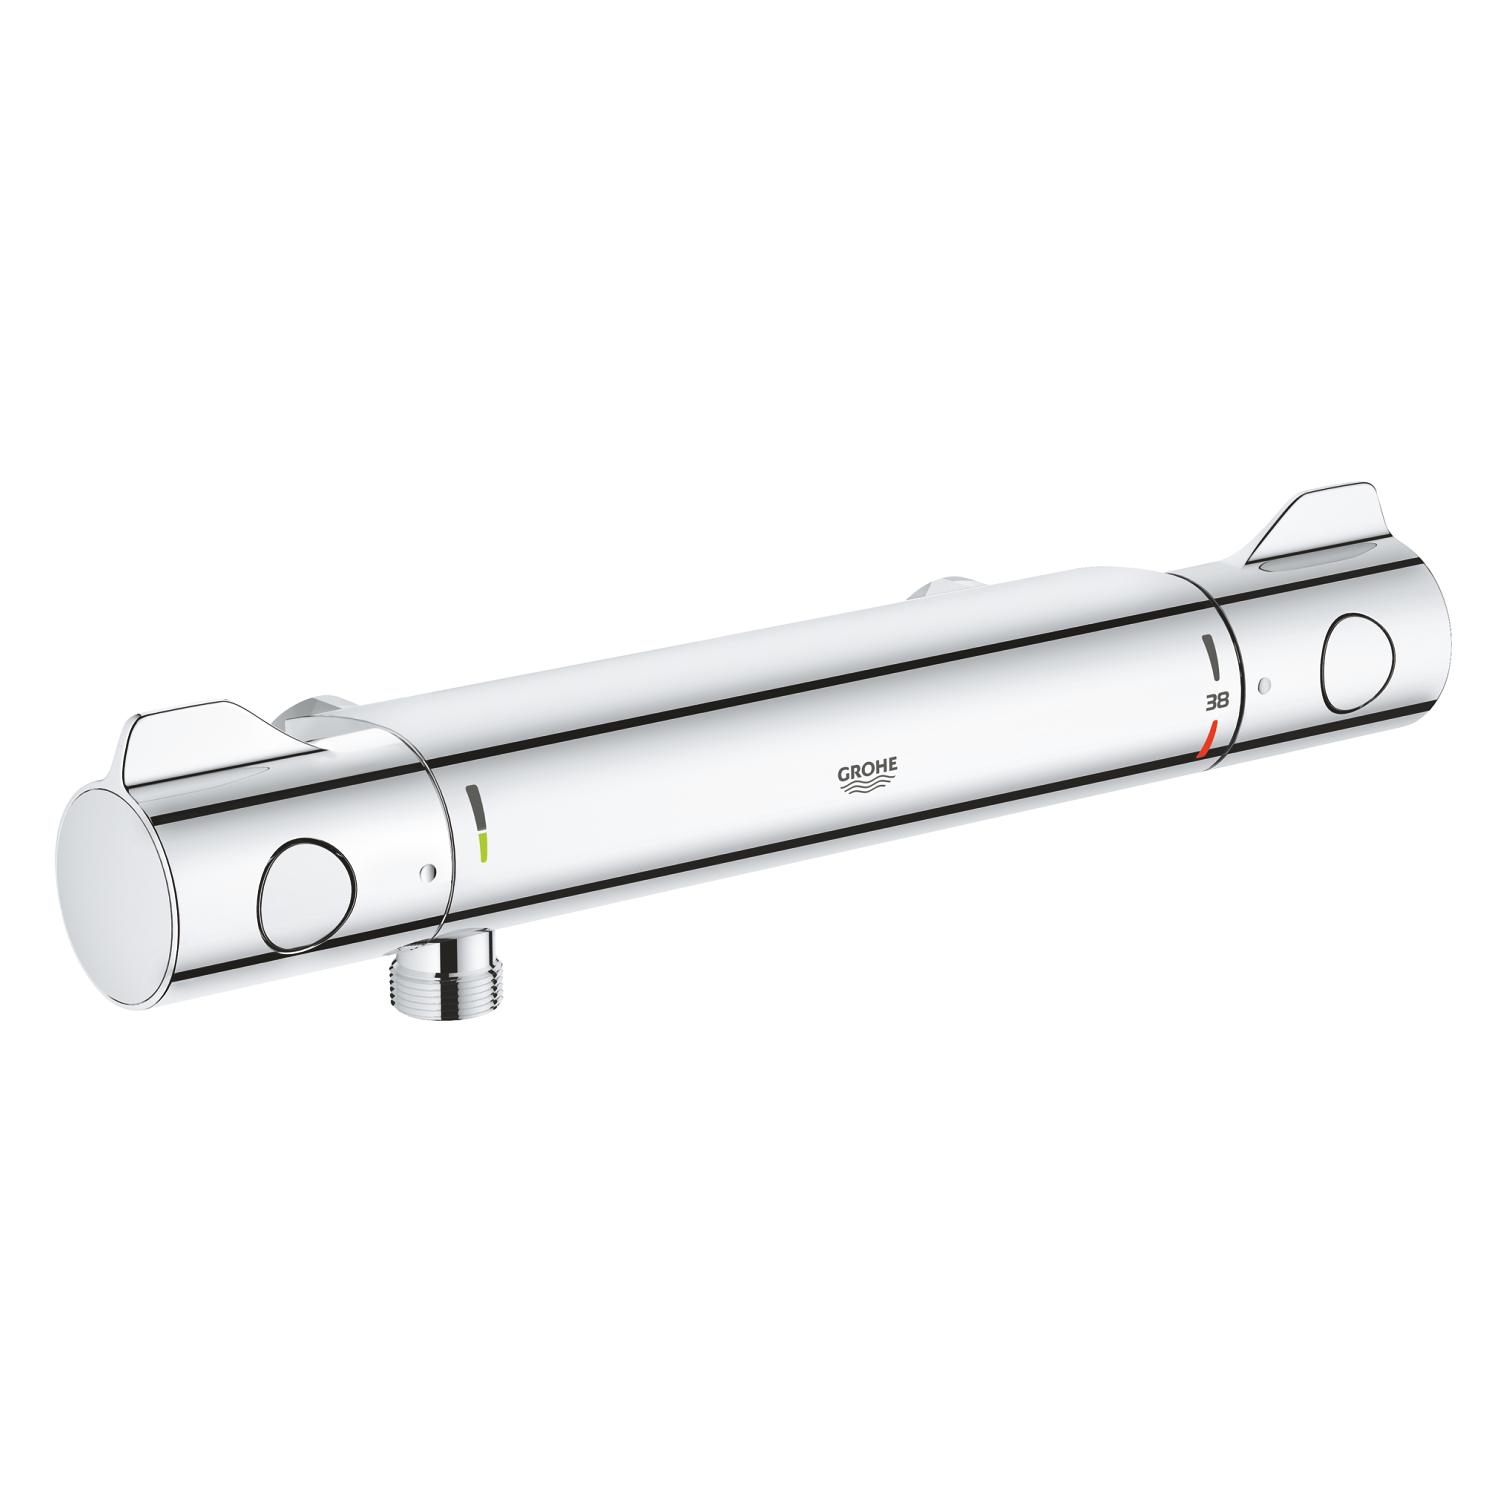 GROHE Grohtherm 800 bei xTWO